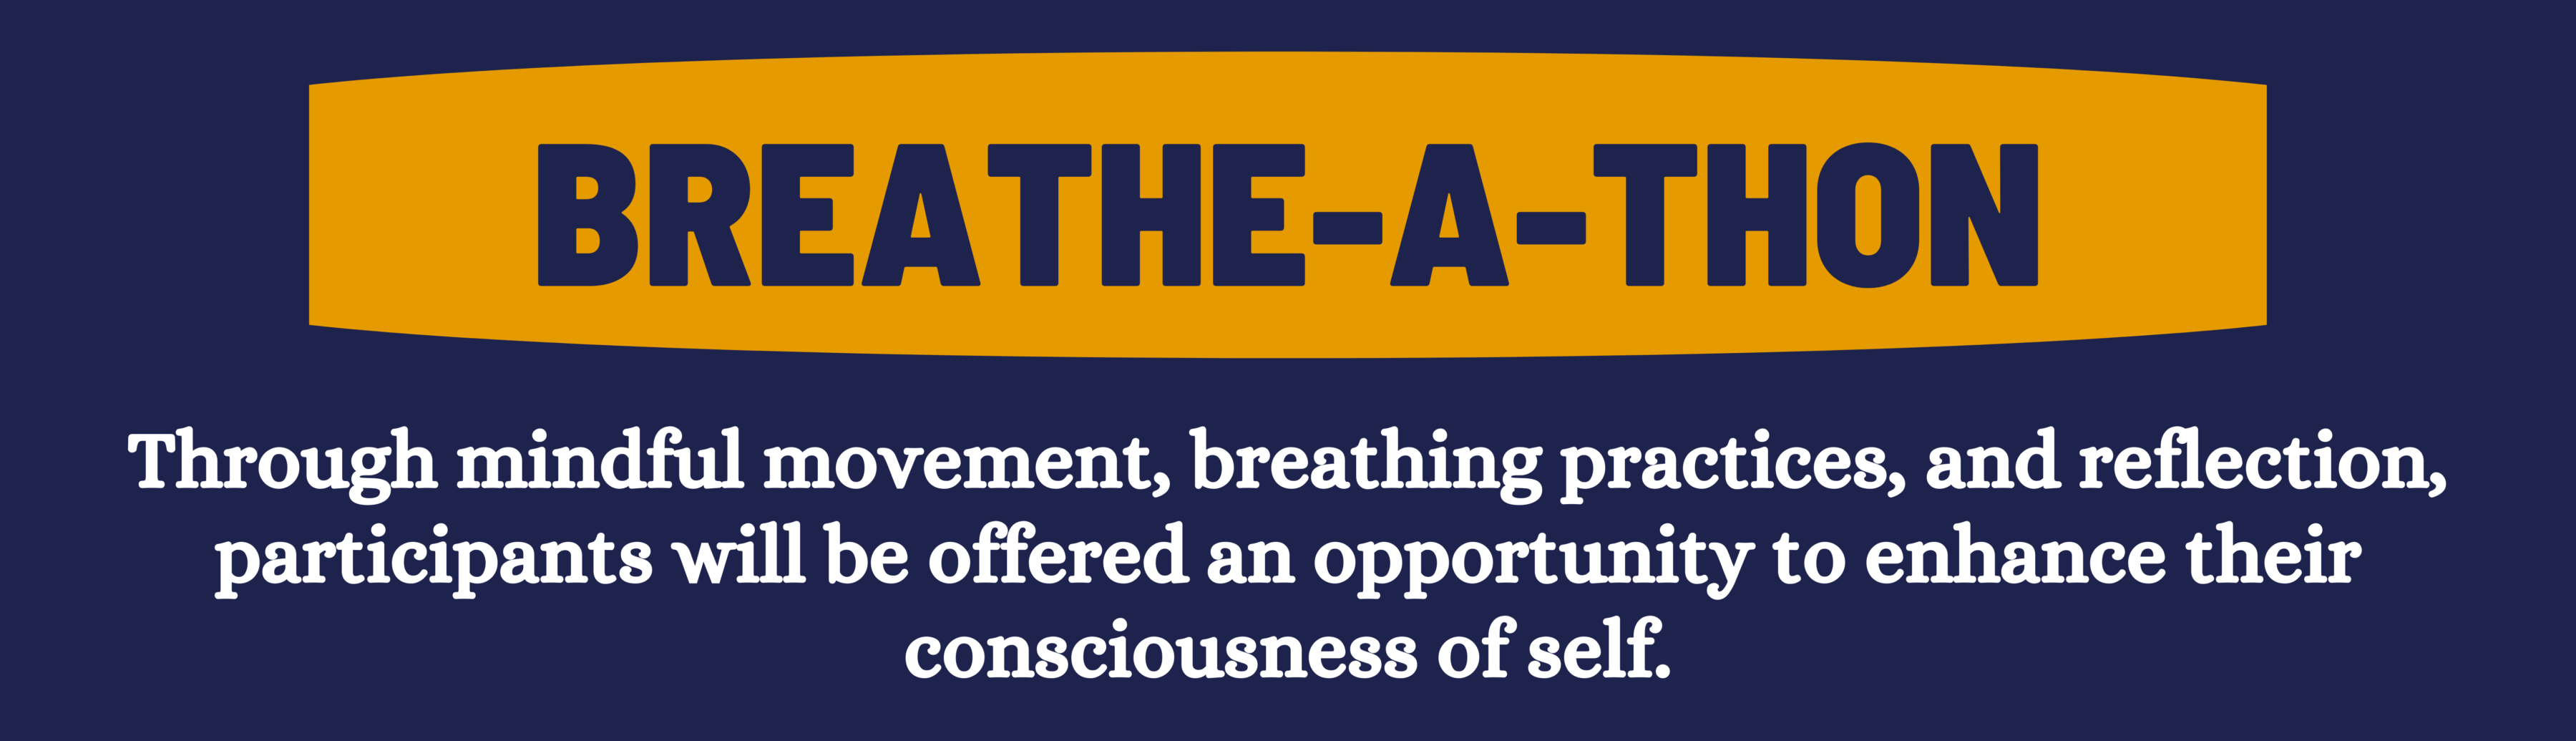 Through mindful movement, breathing practices, and reflection, participants will be offered an opportunity to enhance their consciousness of self.